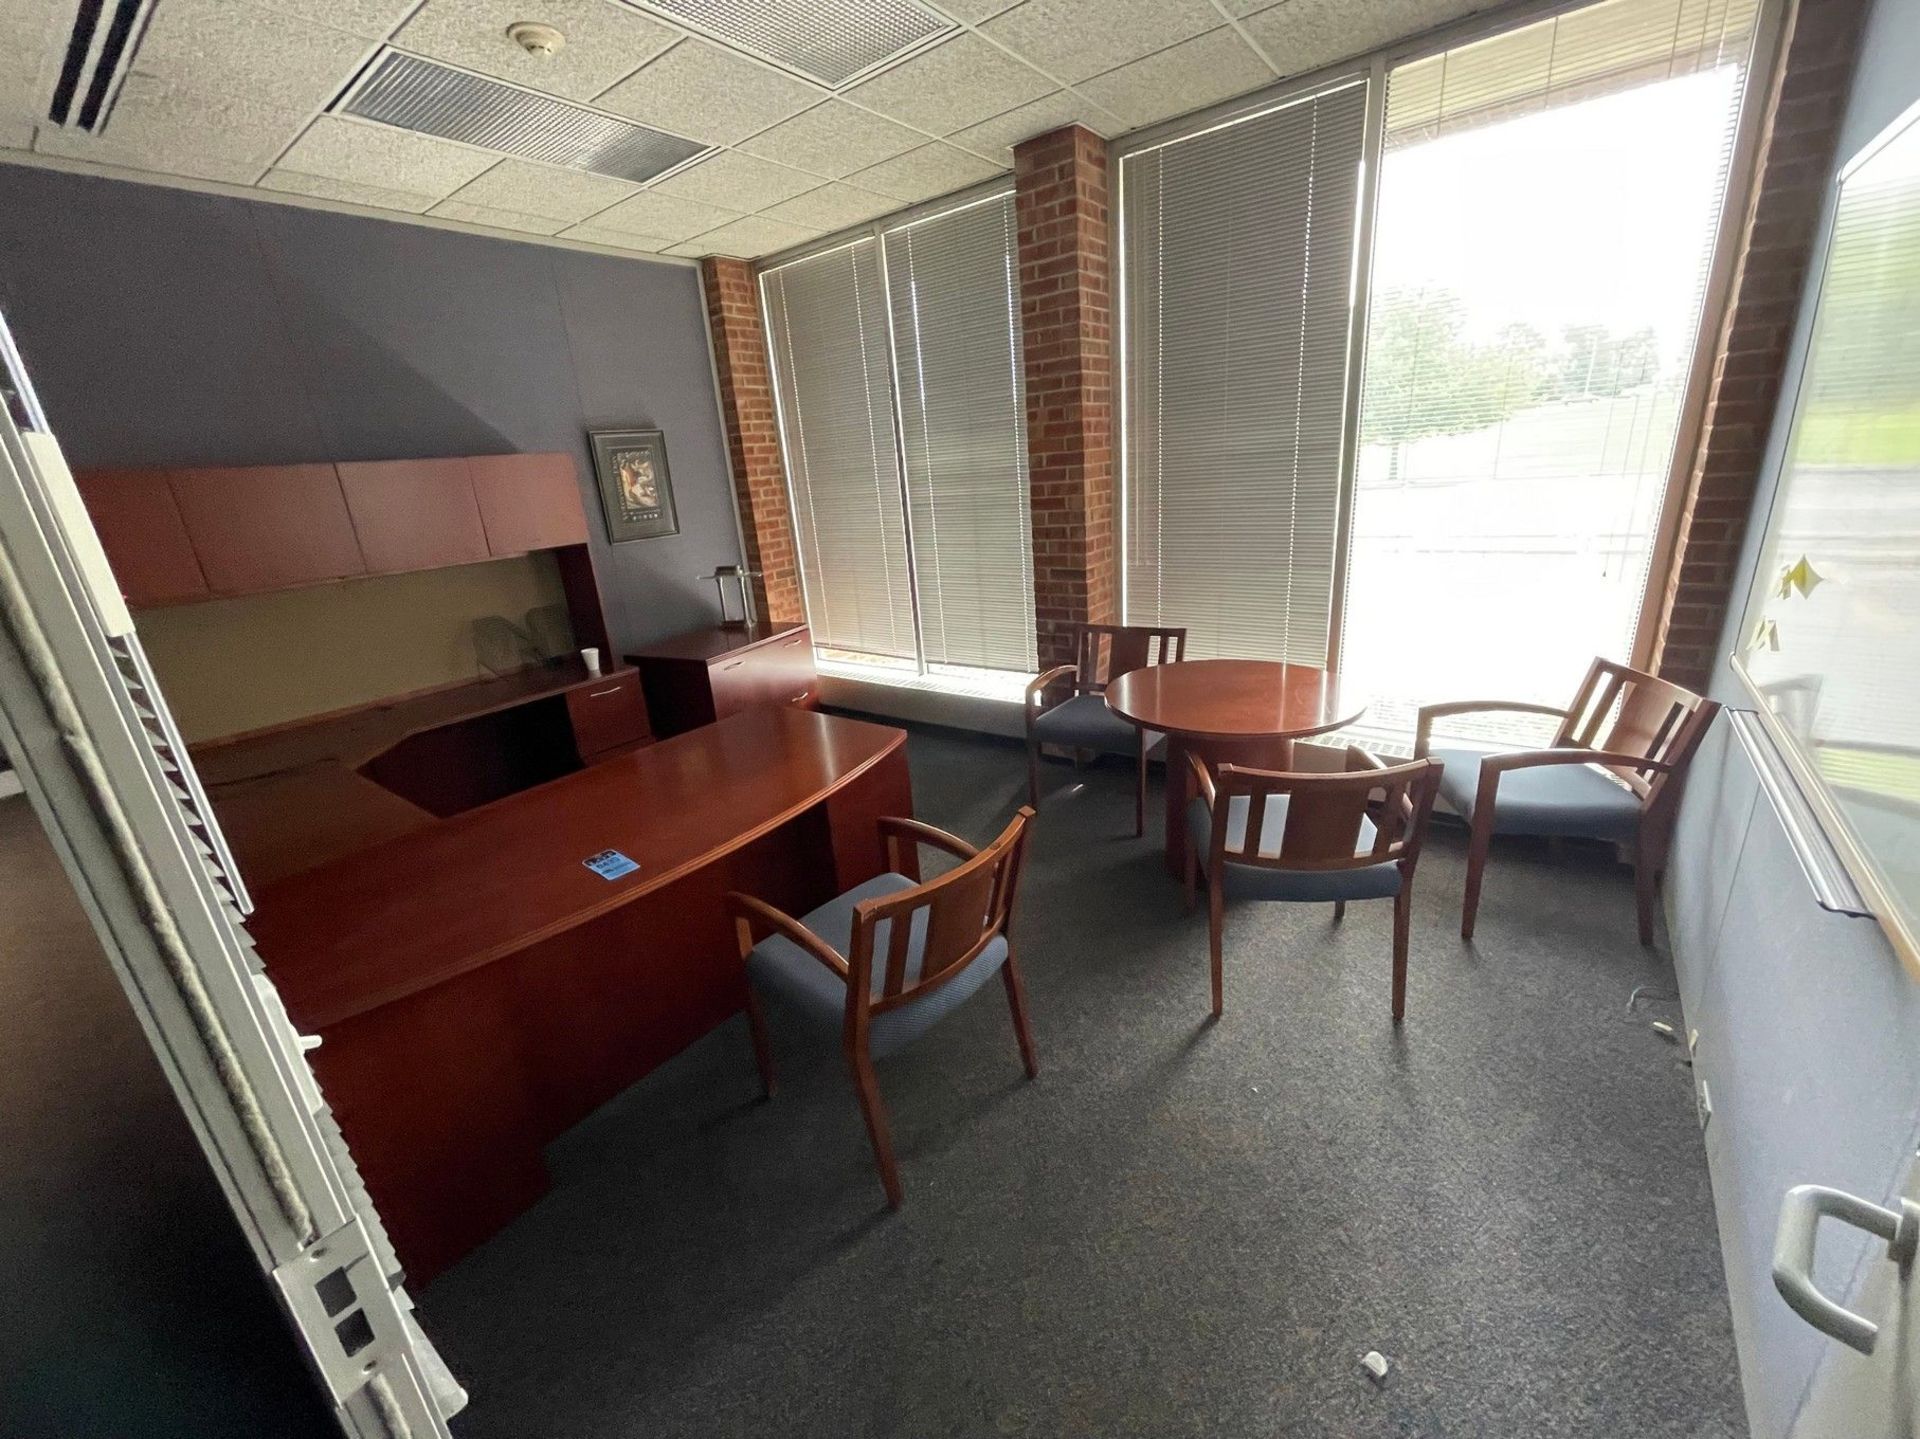 (LOT) EXECUTIVE OFFICE WITH U-SHAPED DESK, 3' DIAMETER TABLE, 2-DRAWER CABINET, (4) CHAIRS